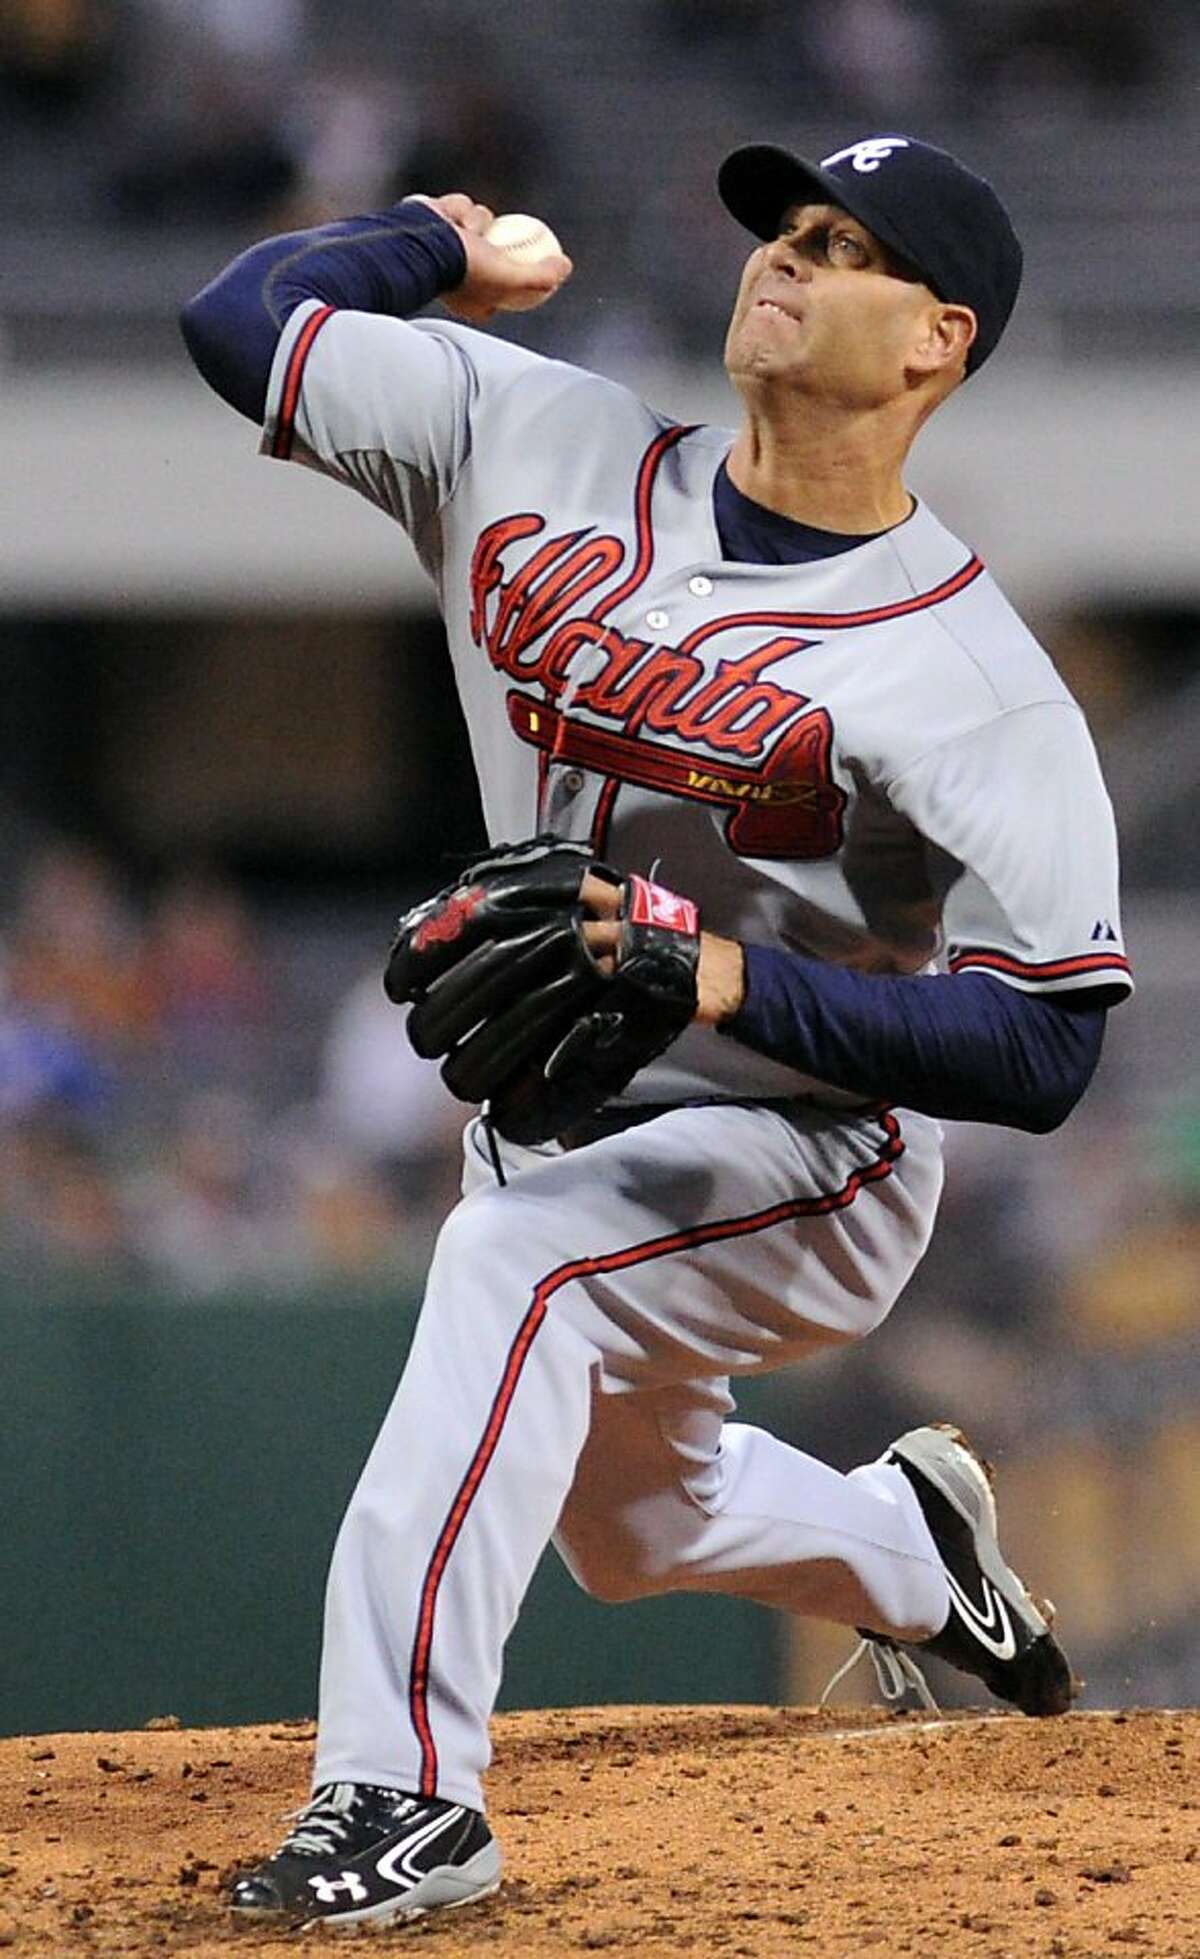 Atlanta Braves starting pitcher Tim Hudson throws in the third inning of a baseball game against the Pittsburgh Pirates at PNC Park, Friday, April 20, 2013, in Pittsburgh. (AP Photo/John Heller)